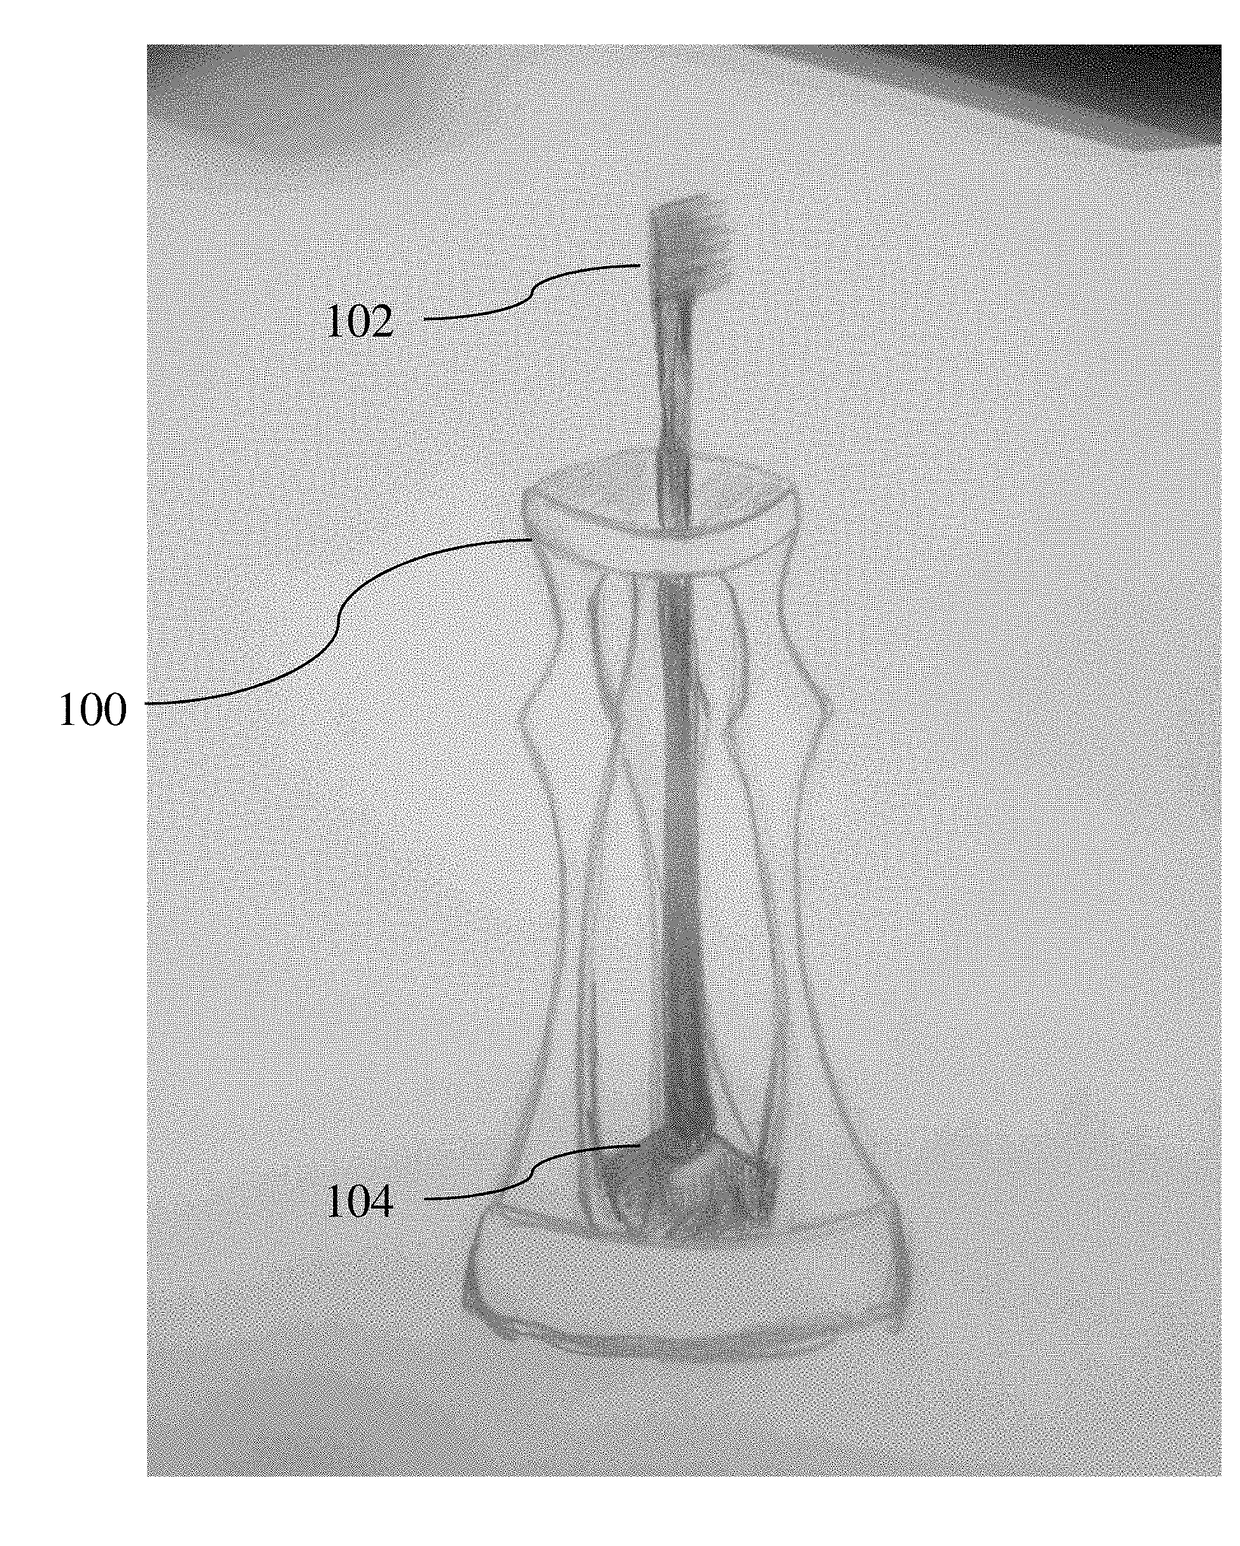 Advanced Oral Hygiene Force Regulation and Technique Improvement Apparatus and Method